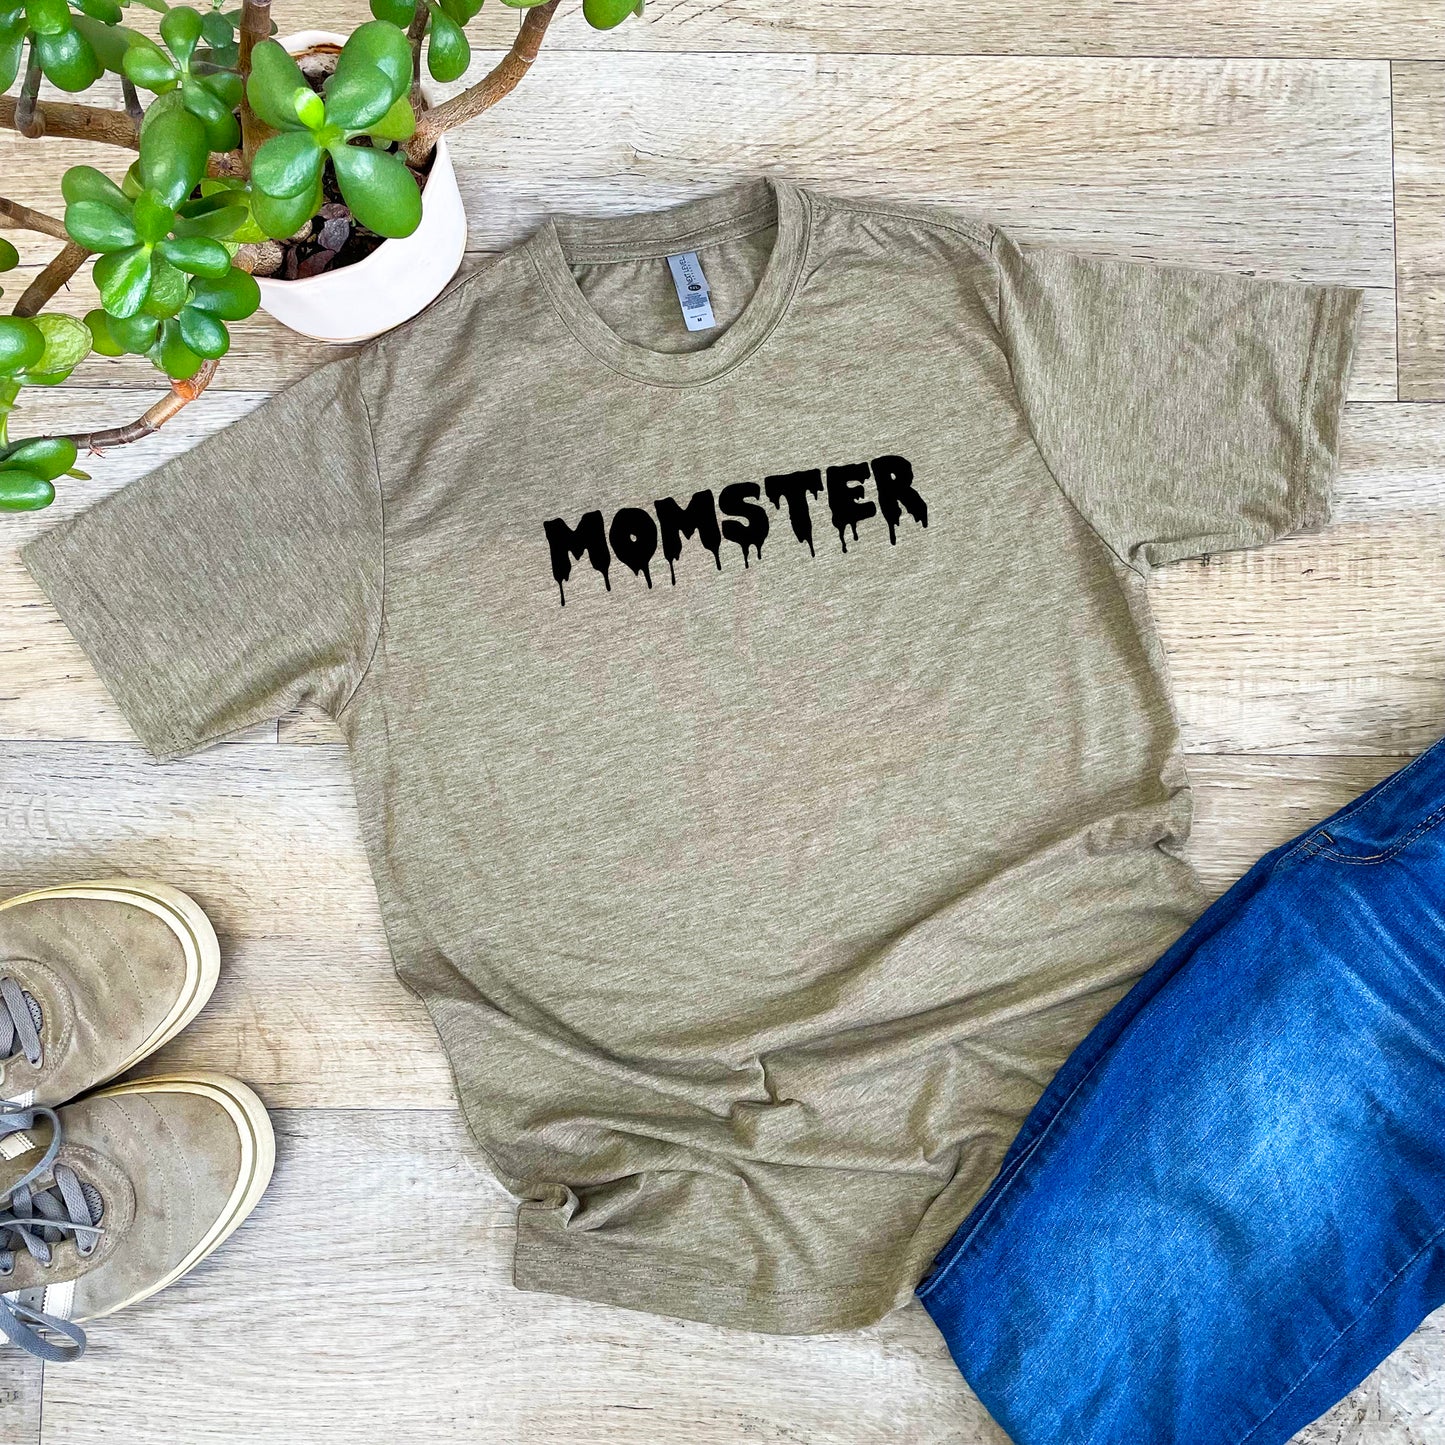 a t - shirt with the word monster on it next to a potted plant